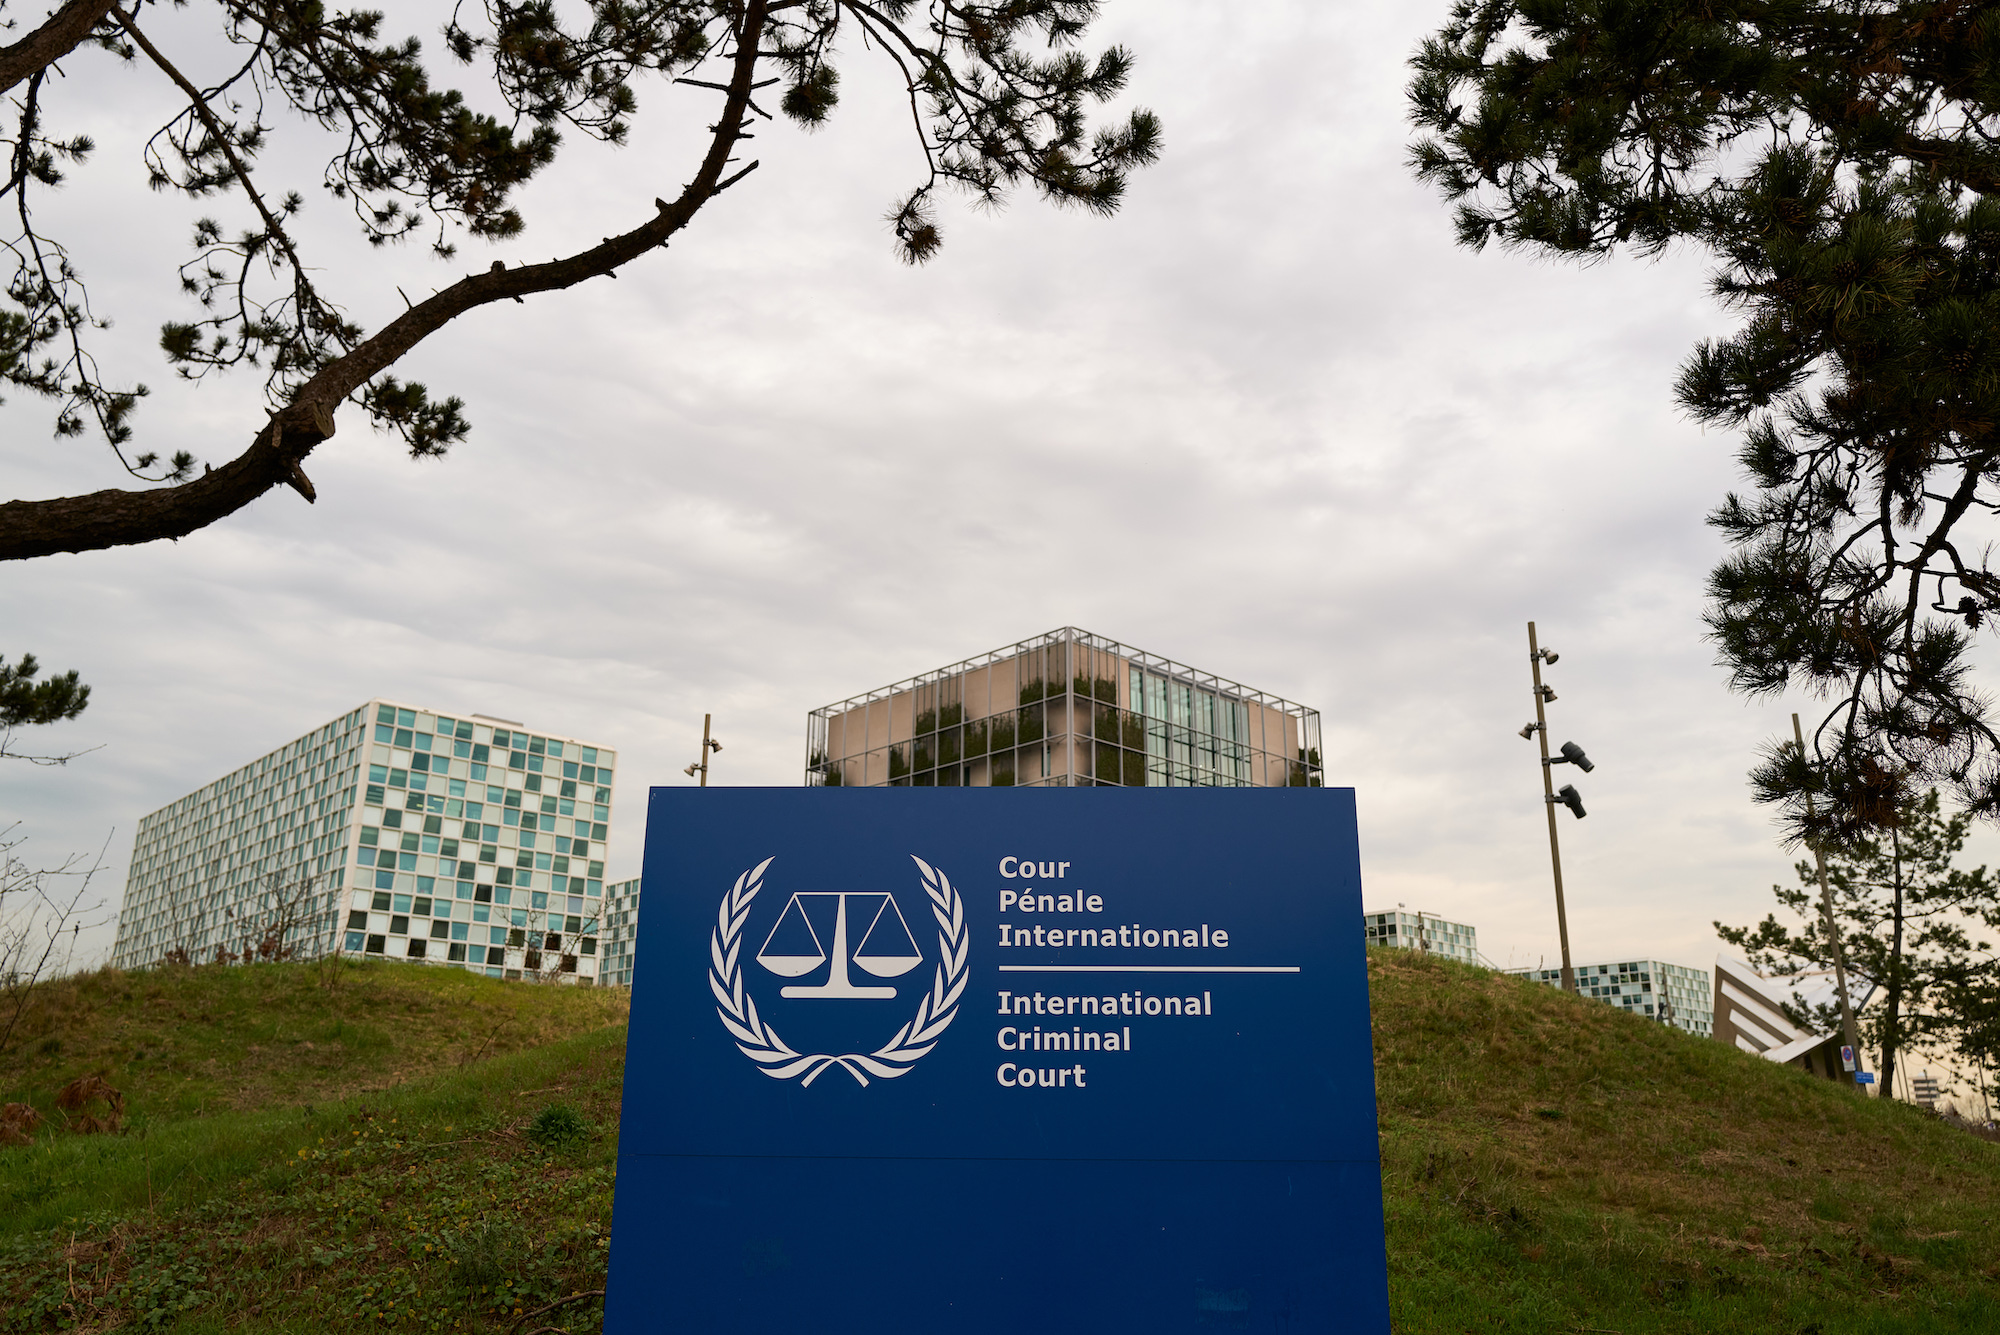 The exterior of the International Criminal Court is seen in The Hague, Netherlands, on Friday.